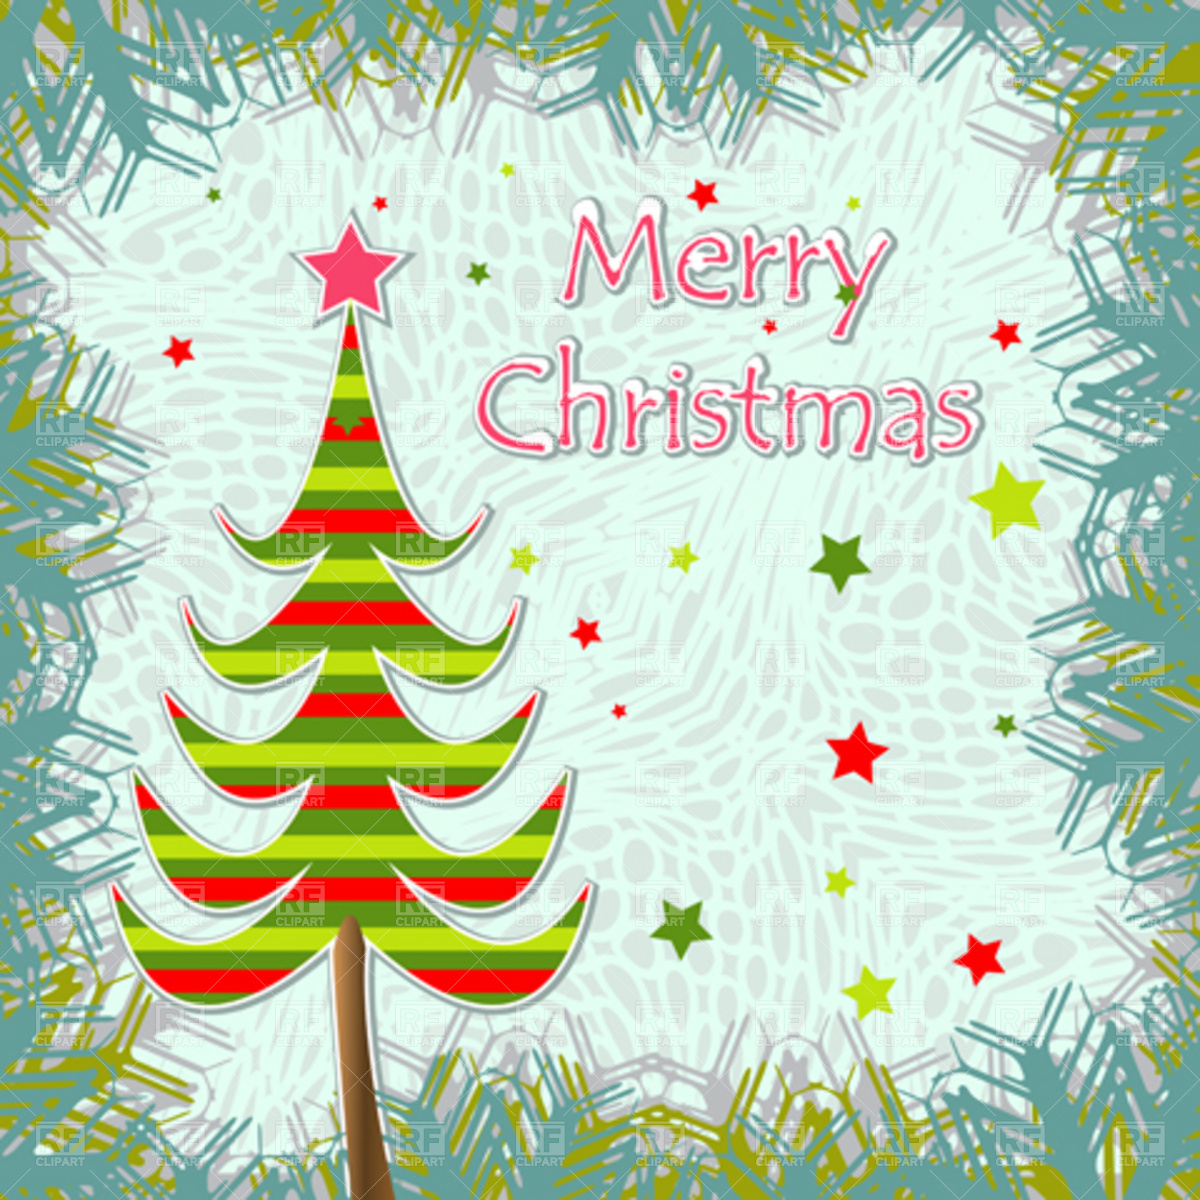 20 Christmas Greeting Card Free Template Images Free Christmas Card Design Templates 